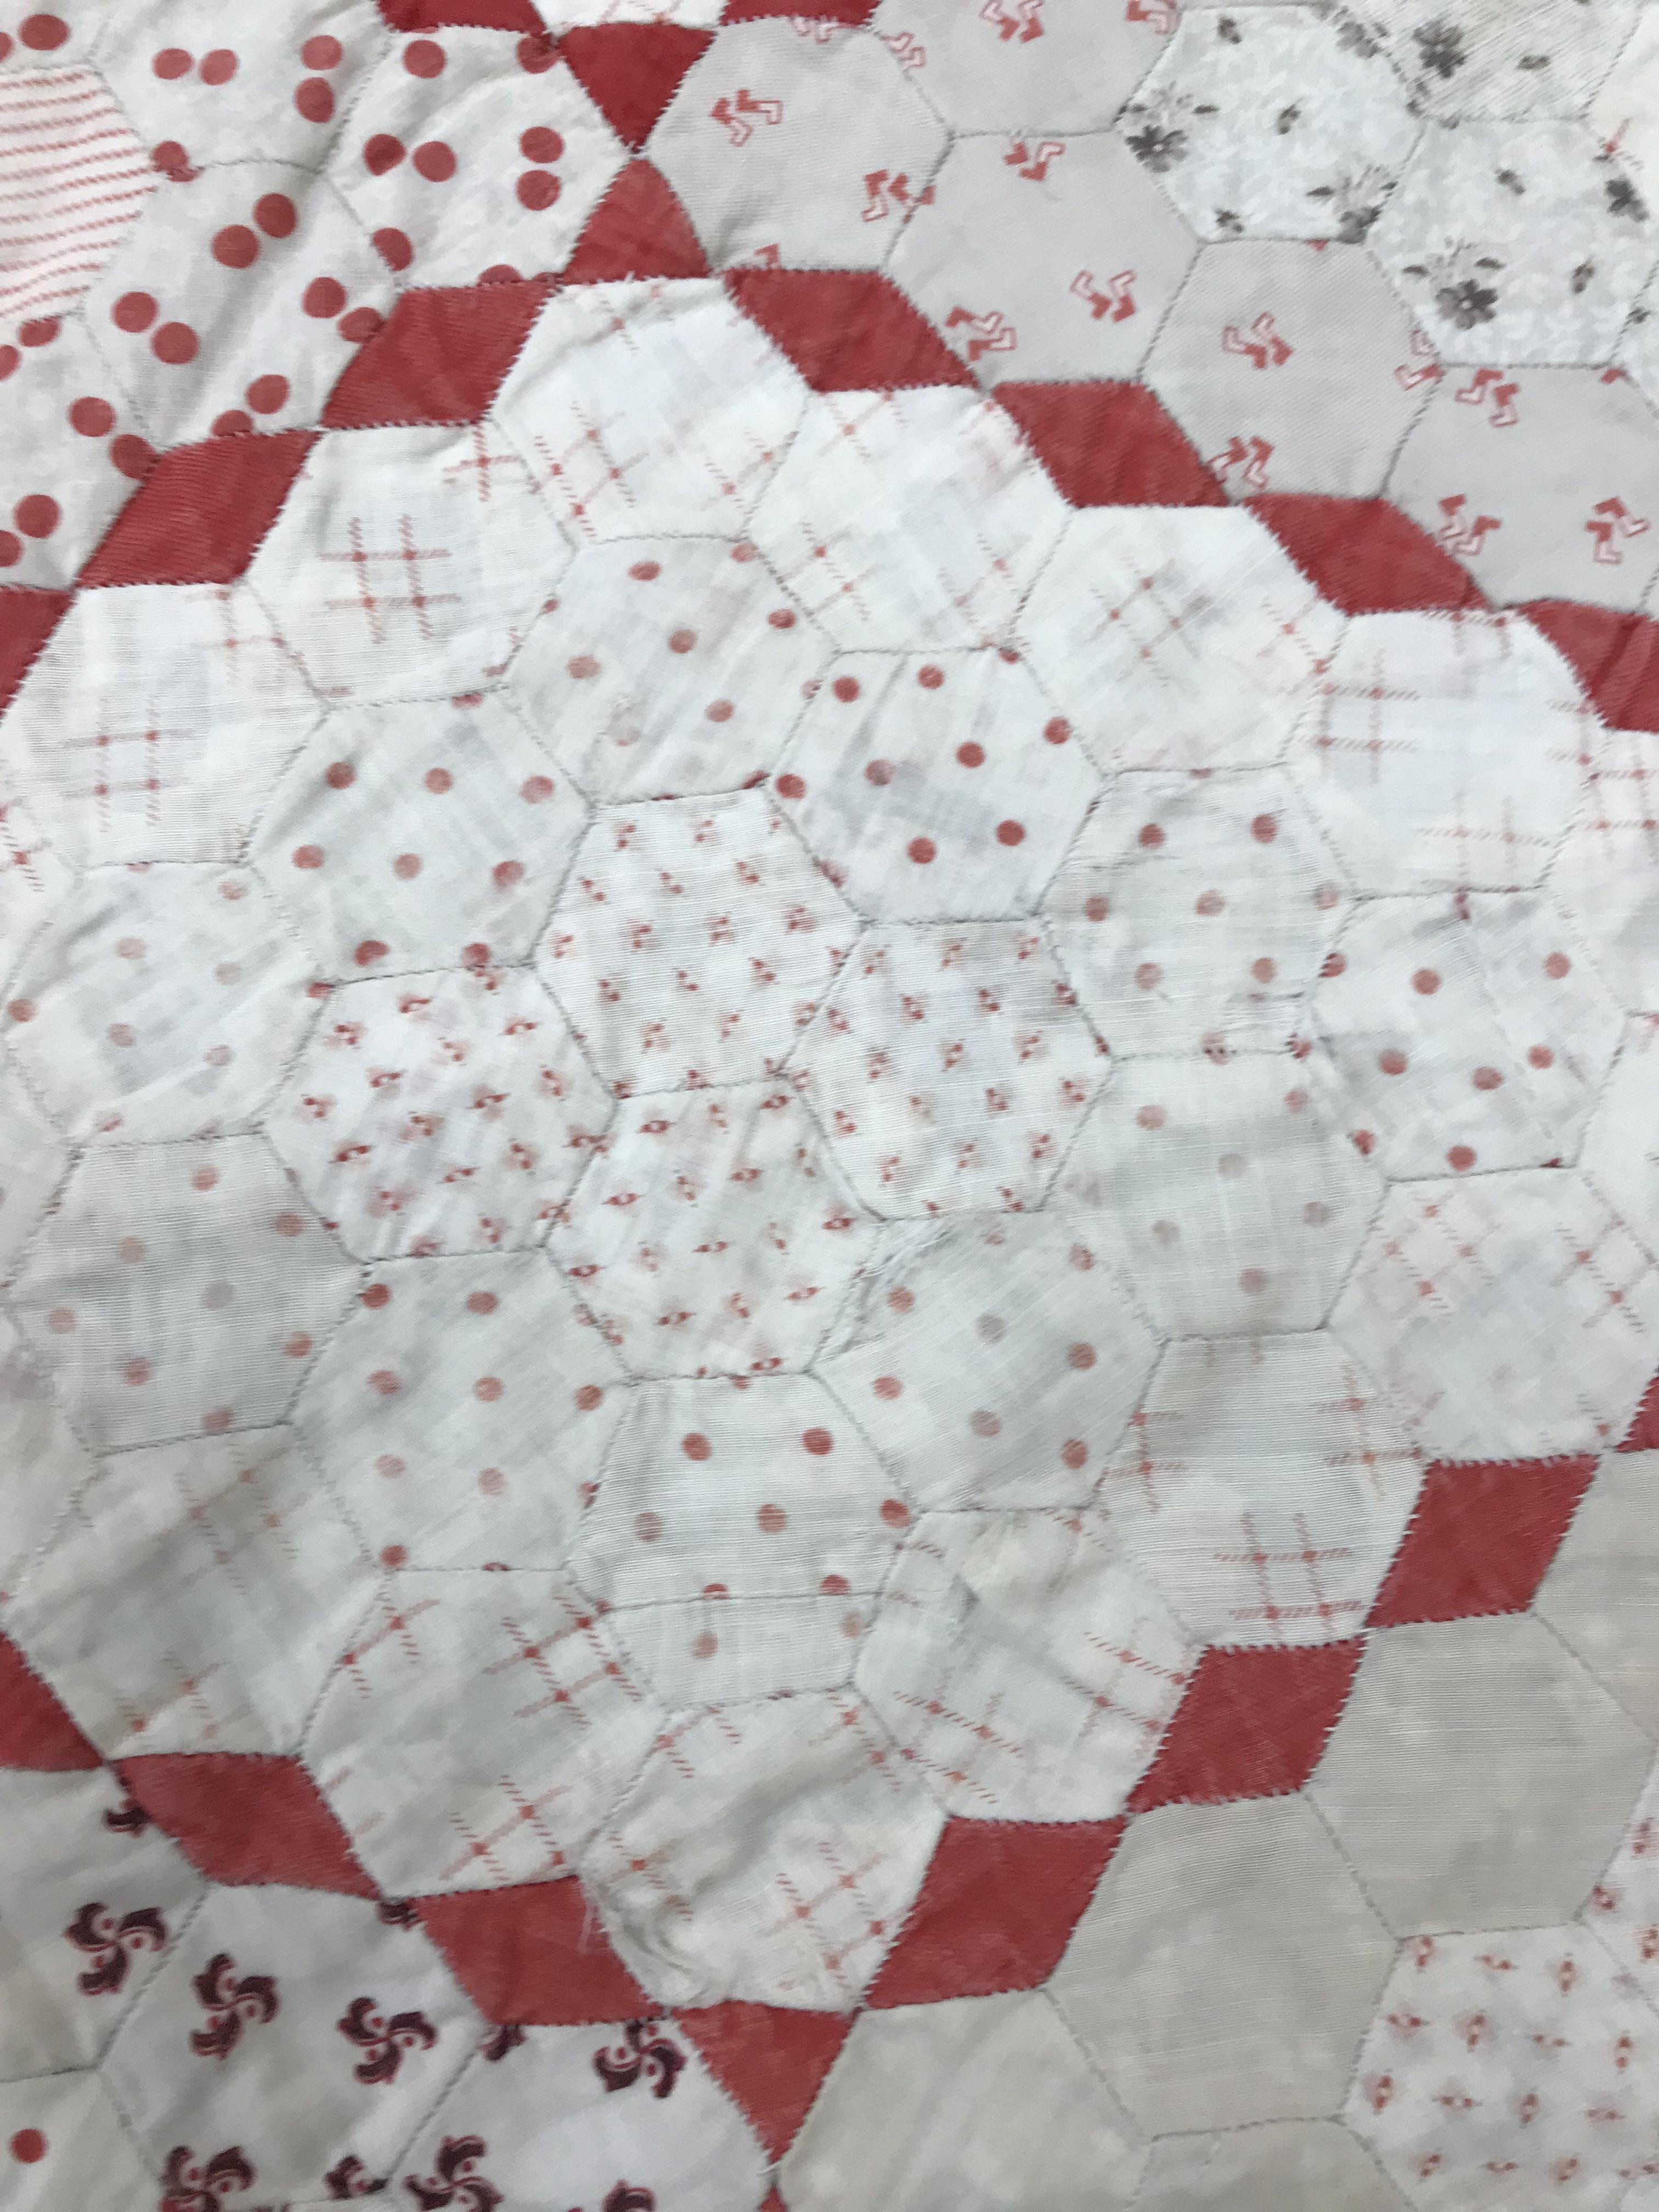 An early 20th Century hand-stitched, pieced quilt, backed with plain fabric and no wadding, - Image 19 of 36